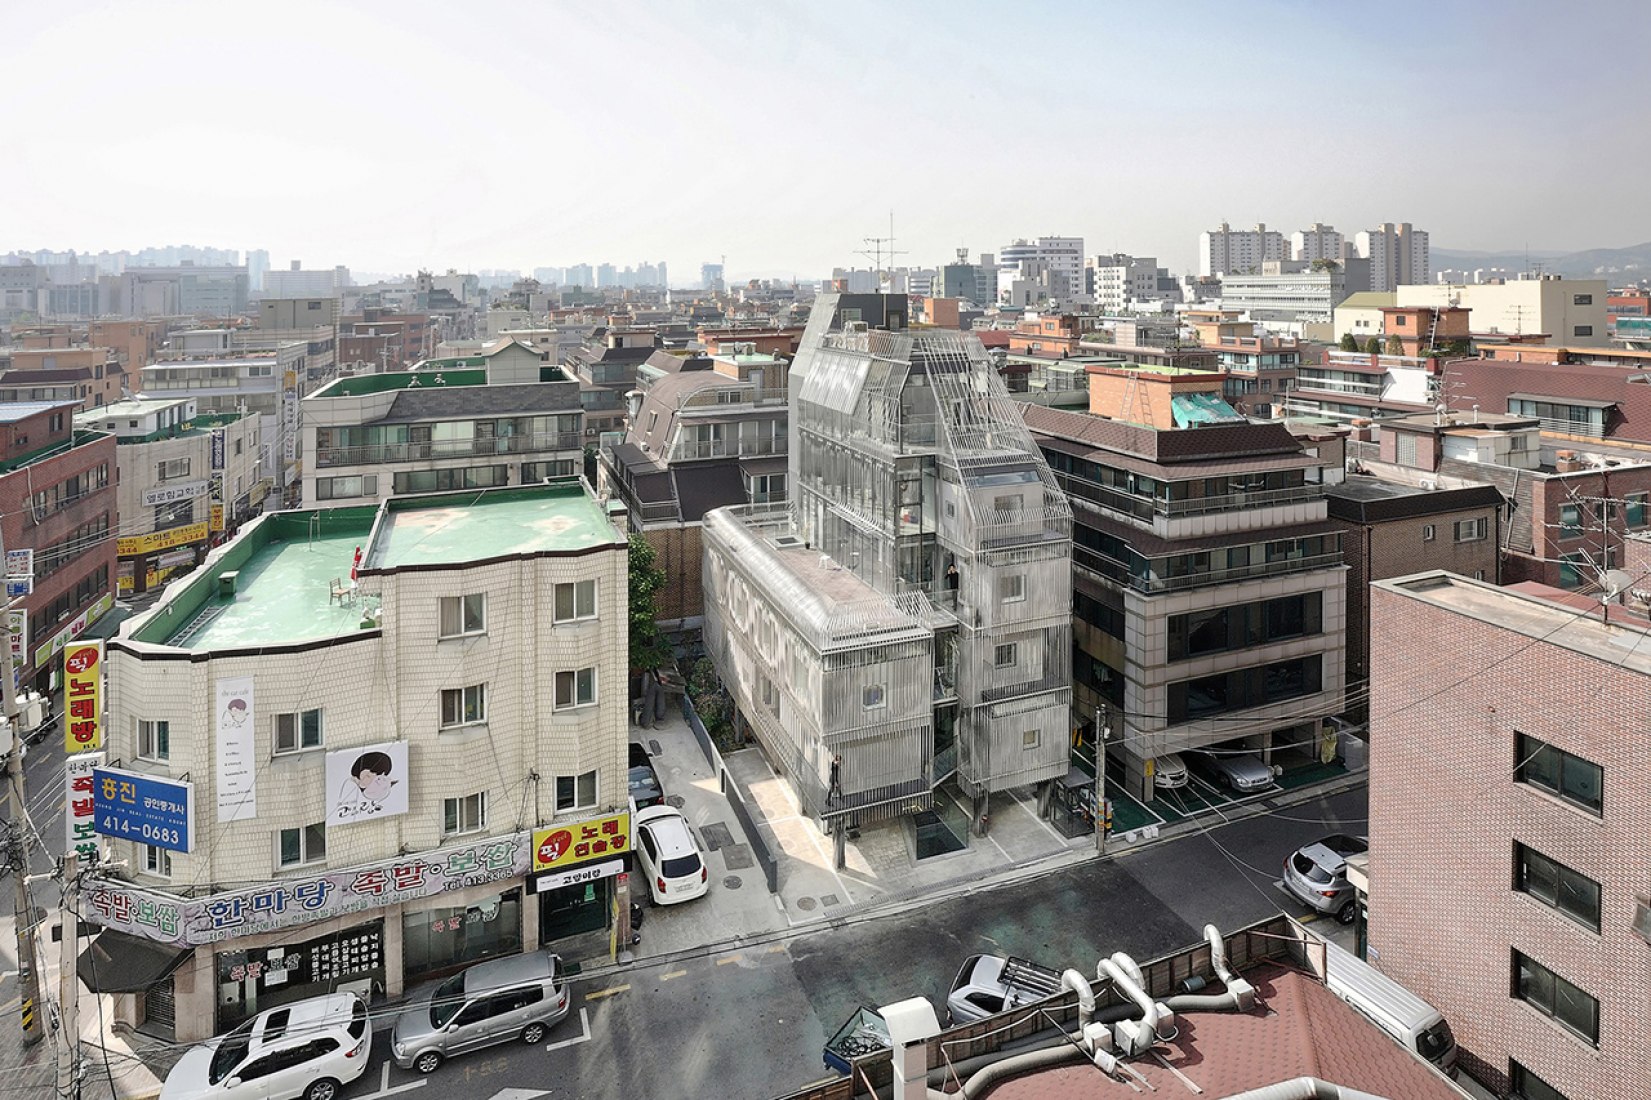 Overview. Songpa Micro Housing by SsD. Photograph © SsD.